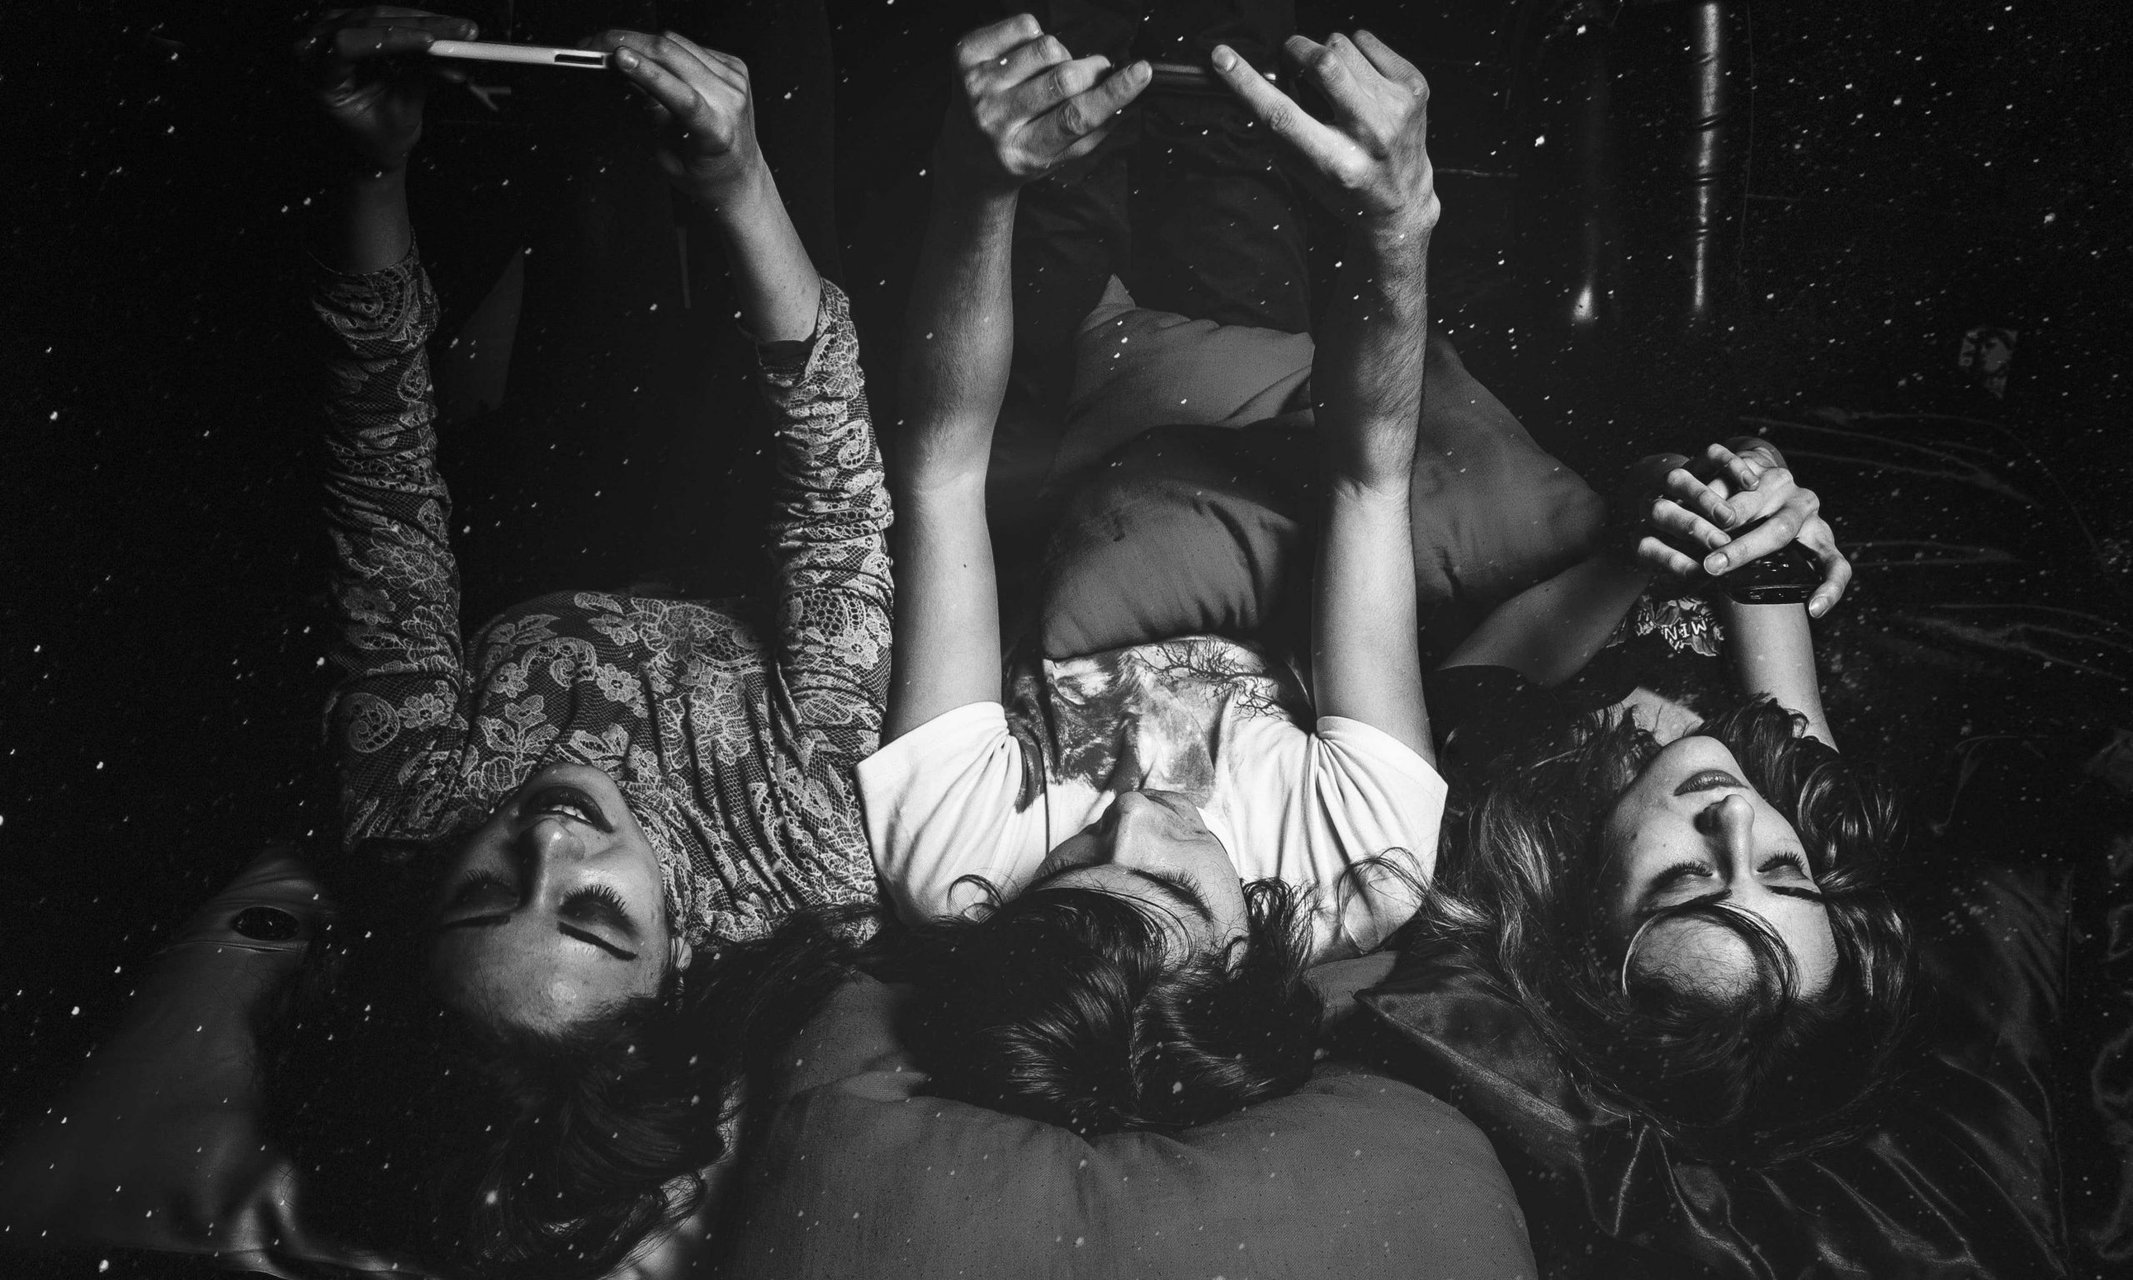 A monochrome photo depicts a gathering of individuals reclining on a bed, highlighting the detrimental impact of phones on relationships and personal responsibility.